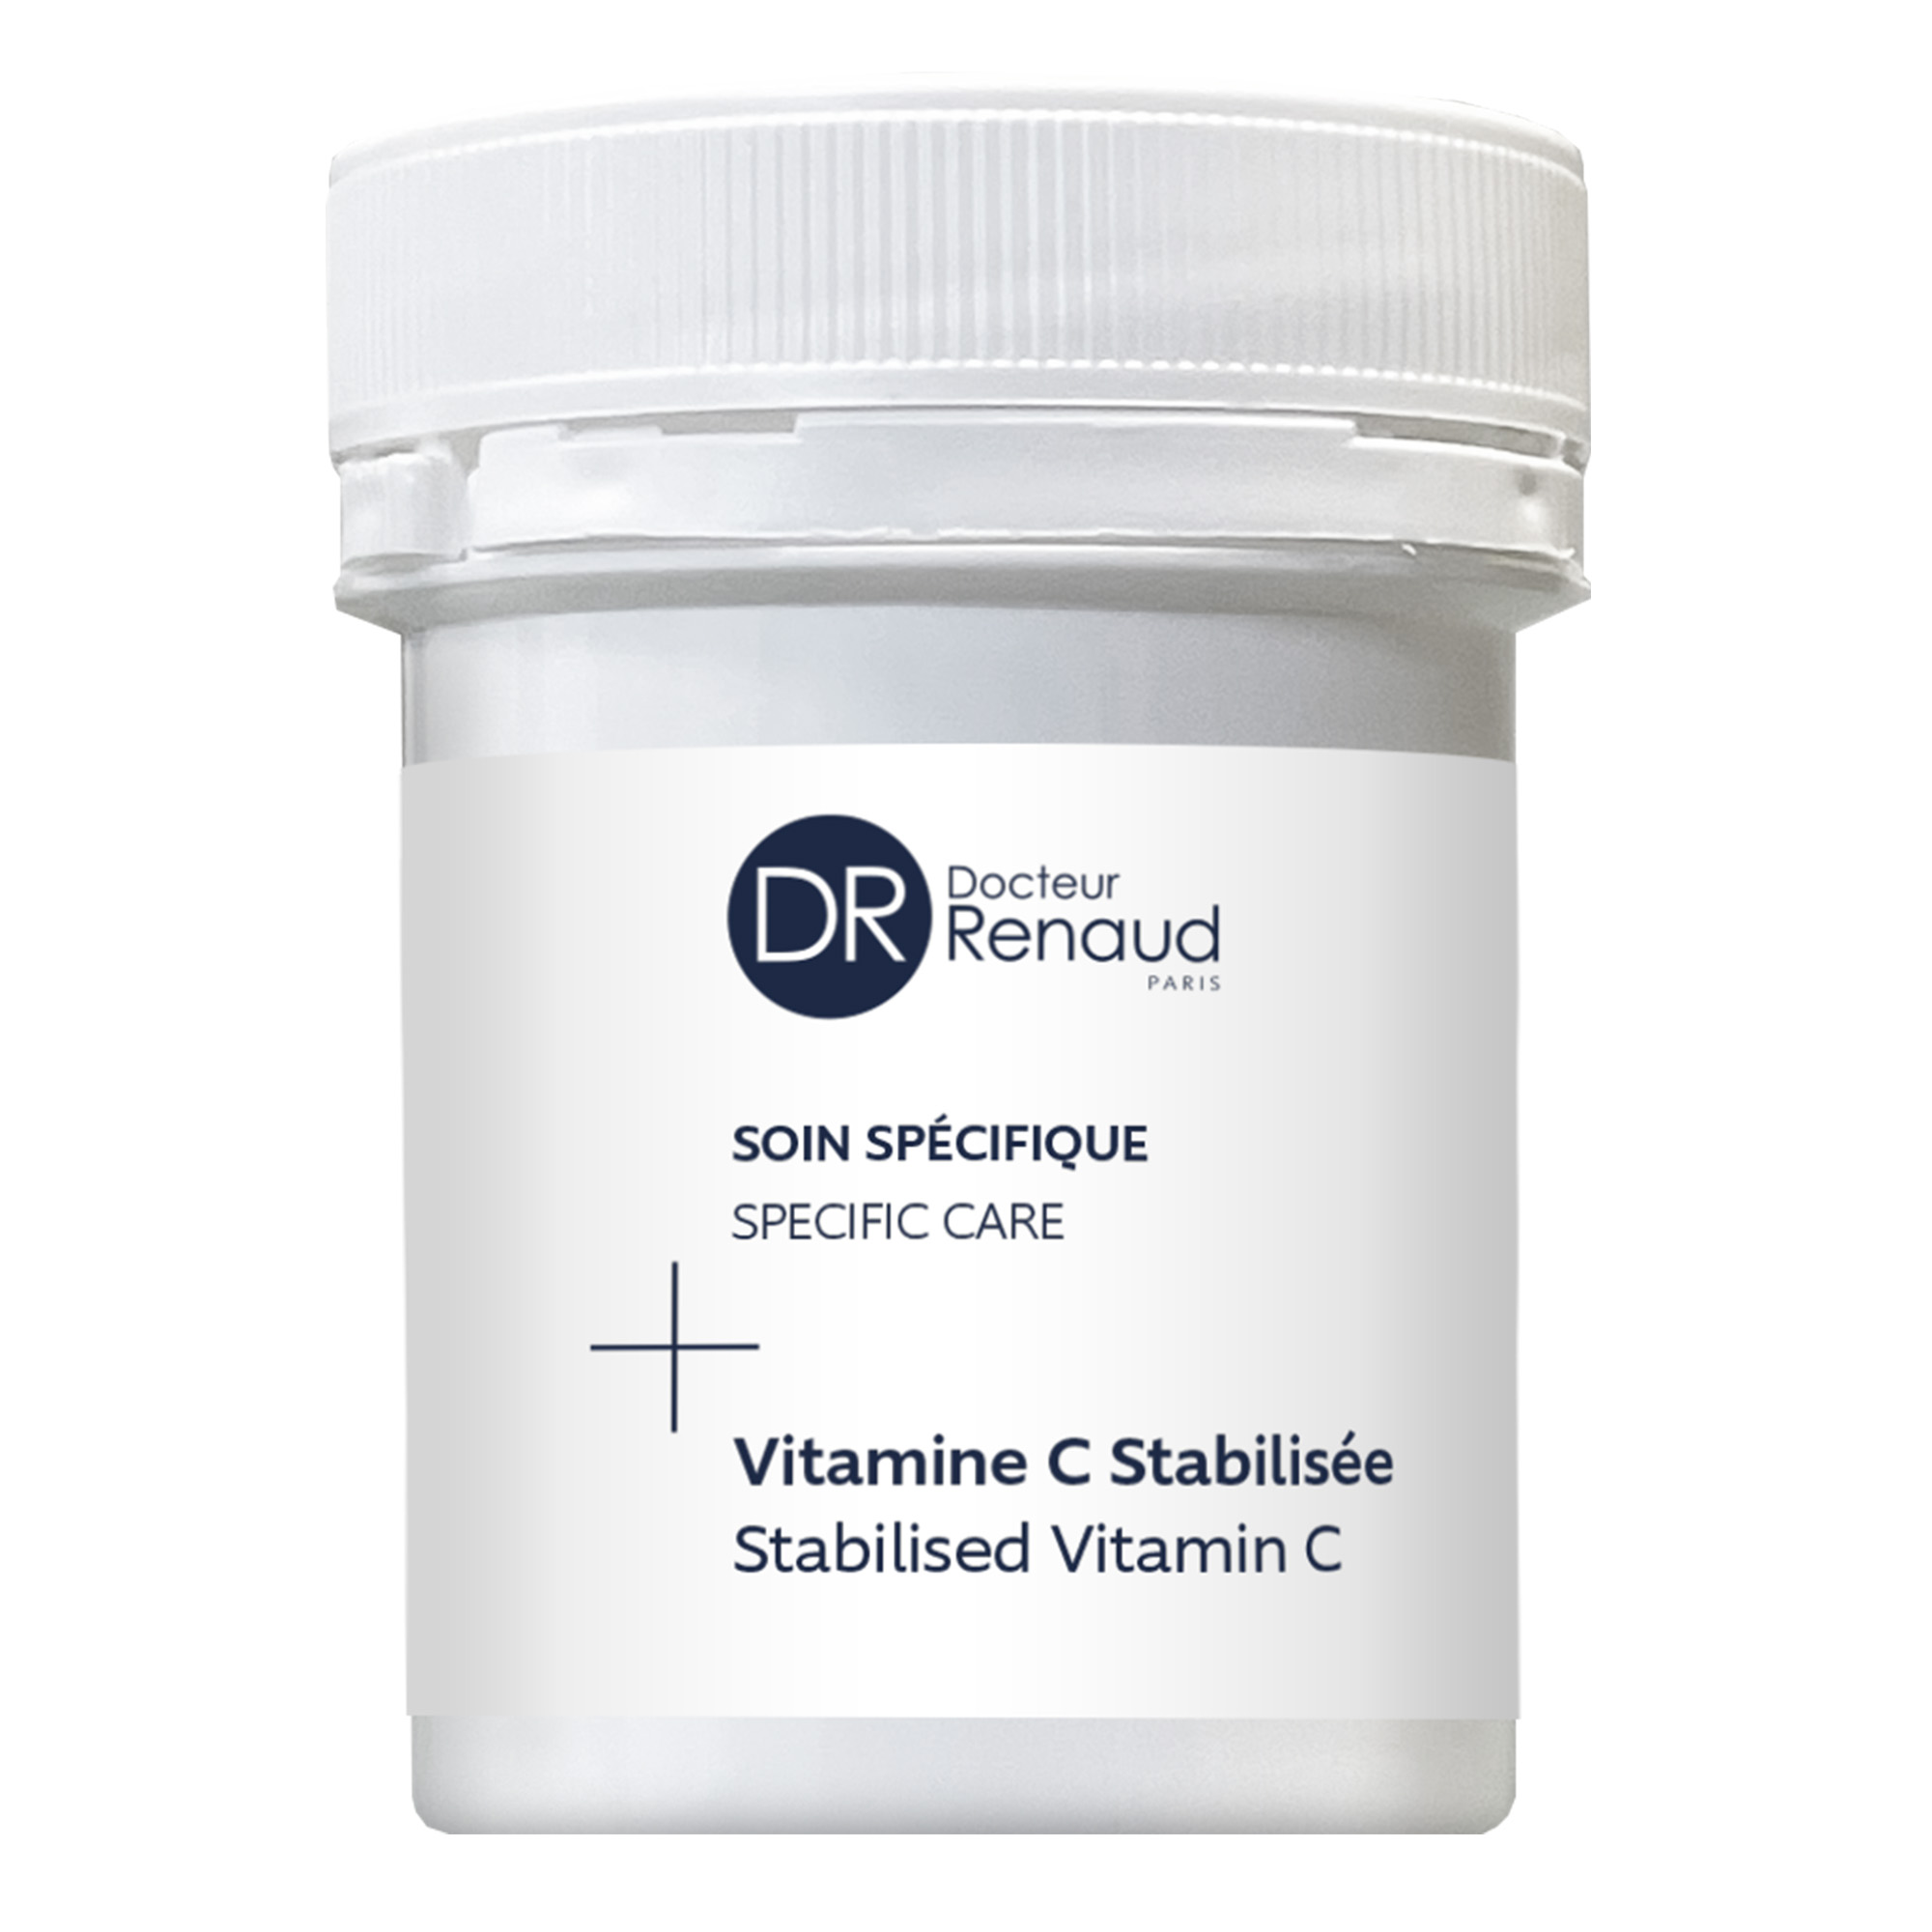 Professional Vitamin C Booster for the face